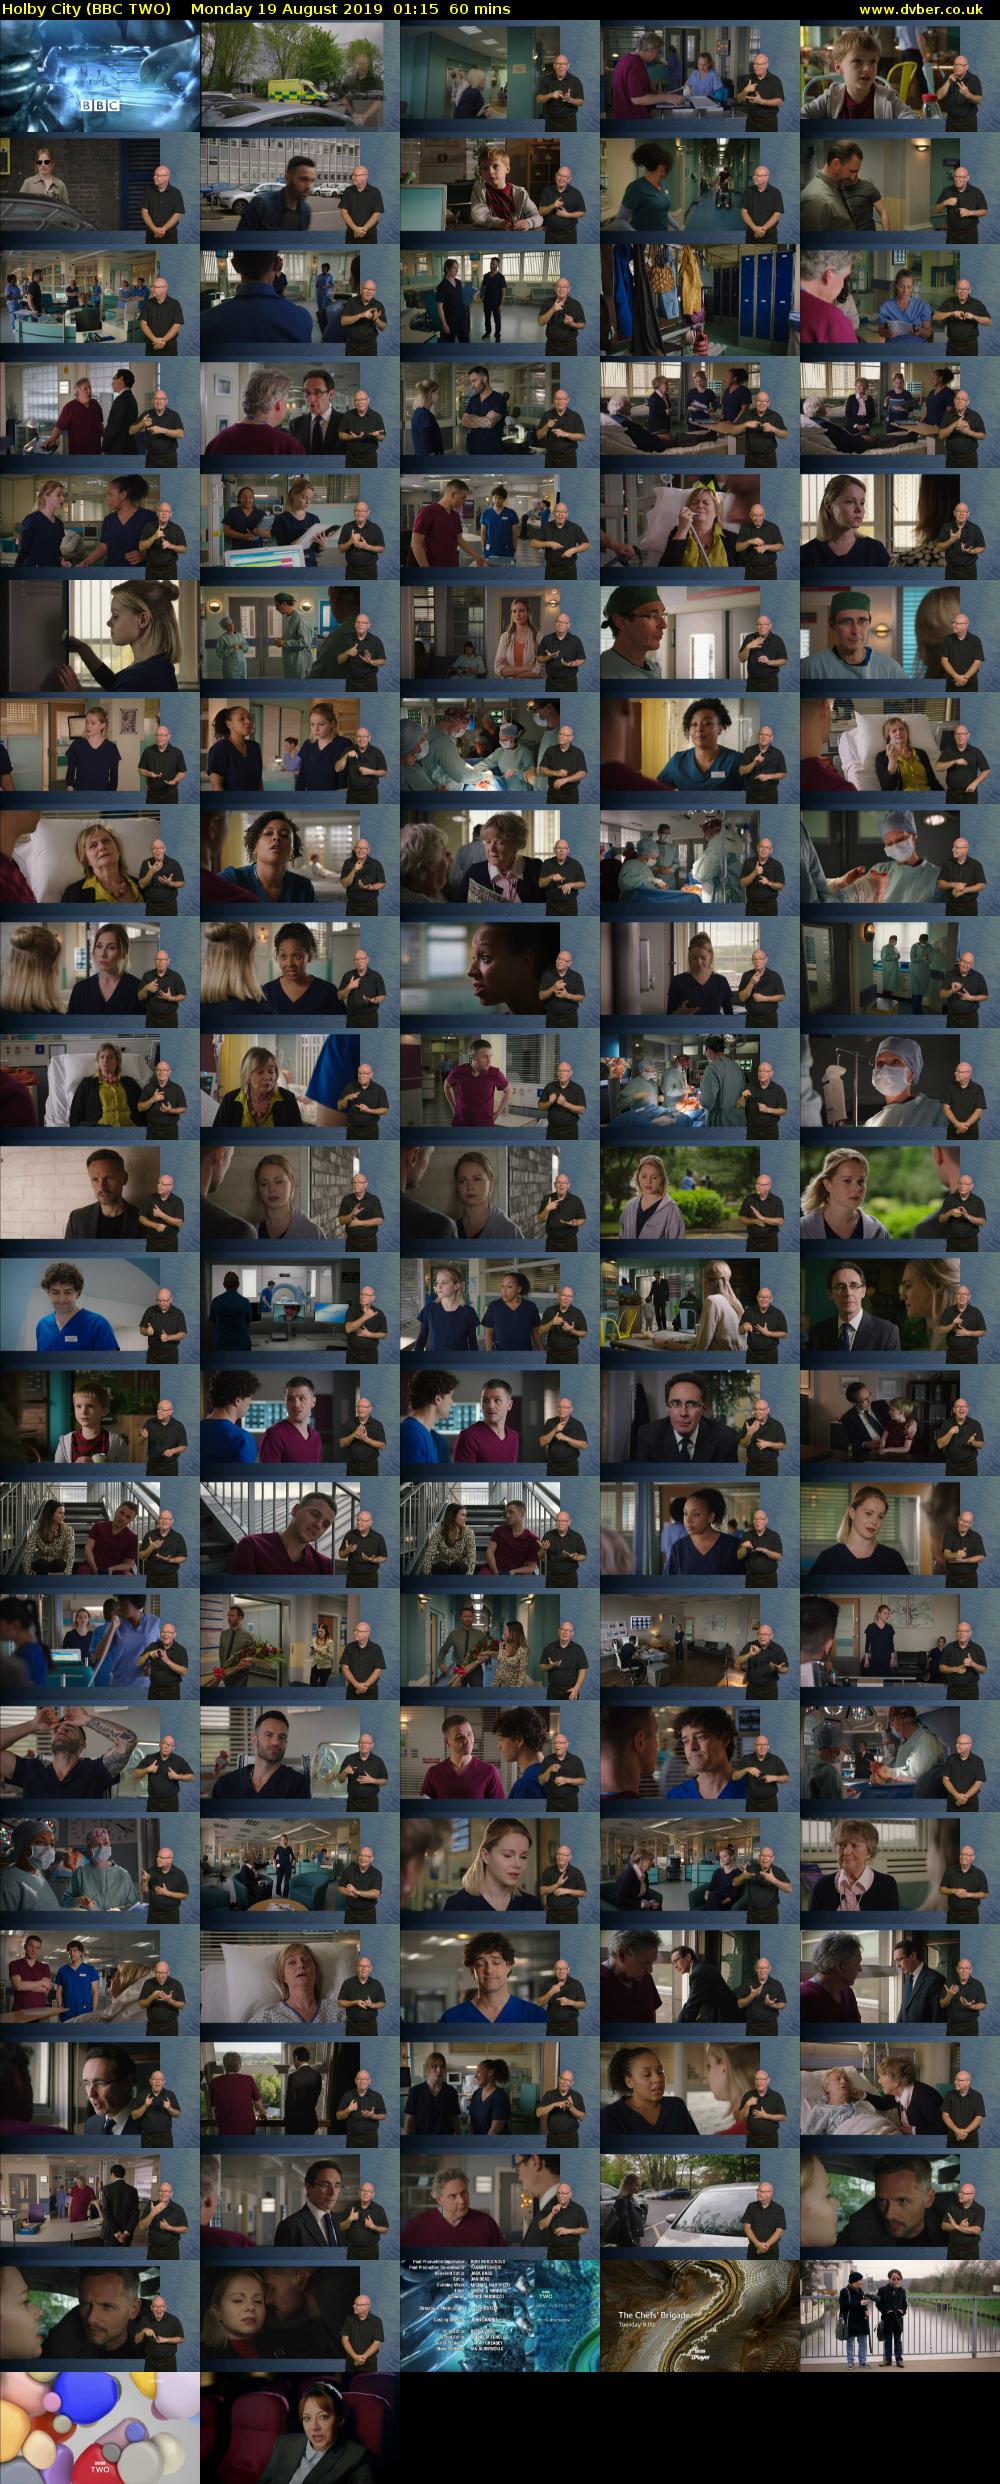 Holby City (BBC TWO) Monday 19 August 2019 01:15 - 02:15